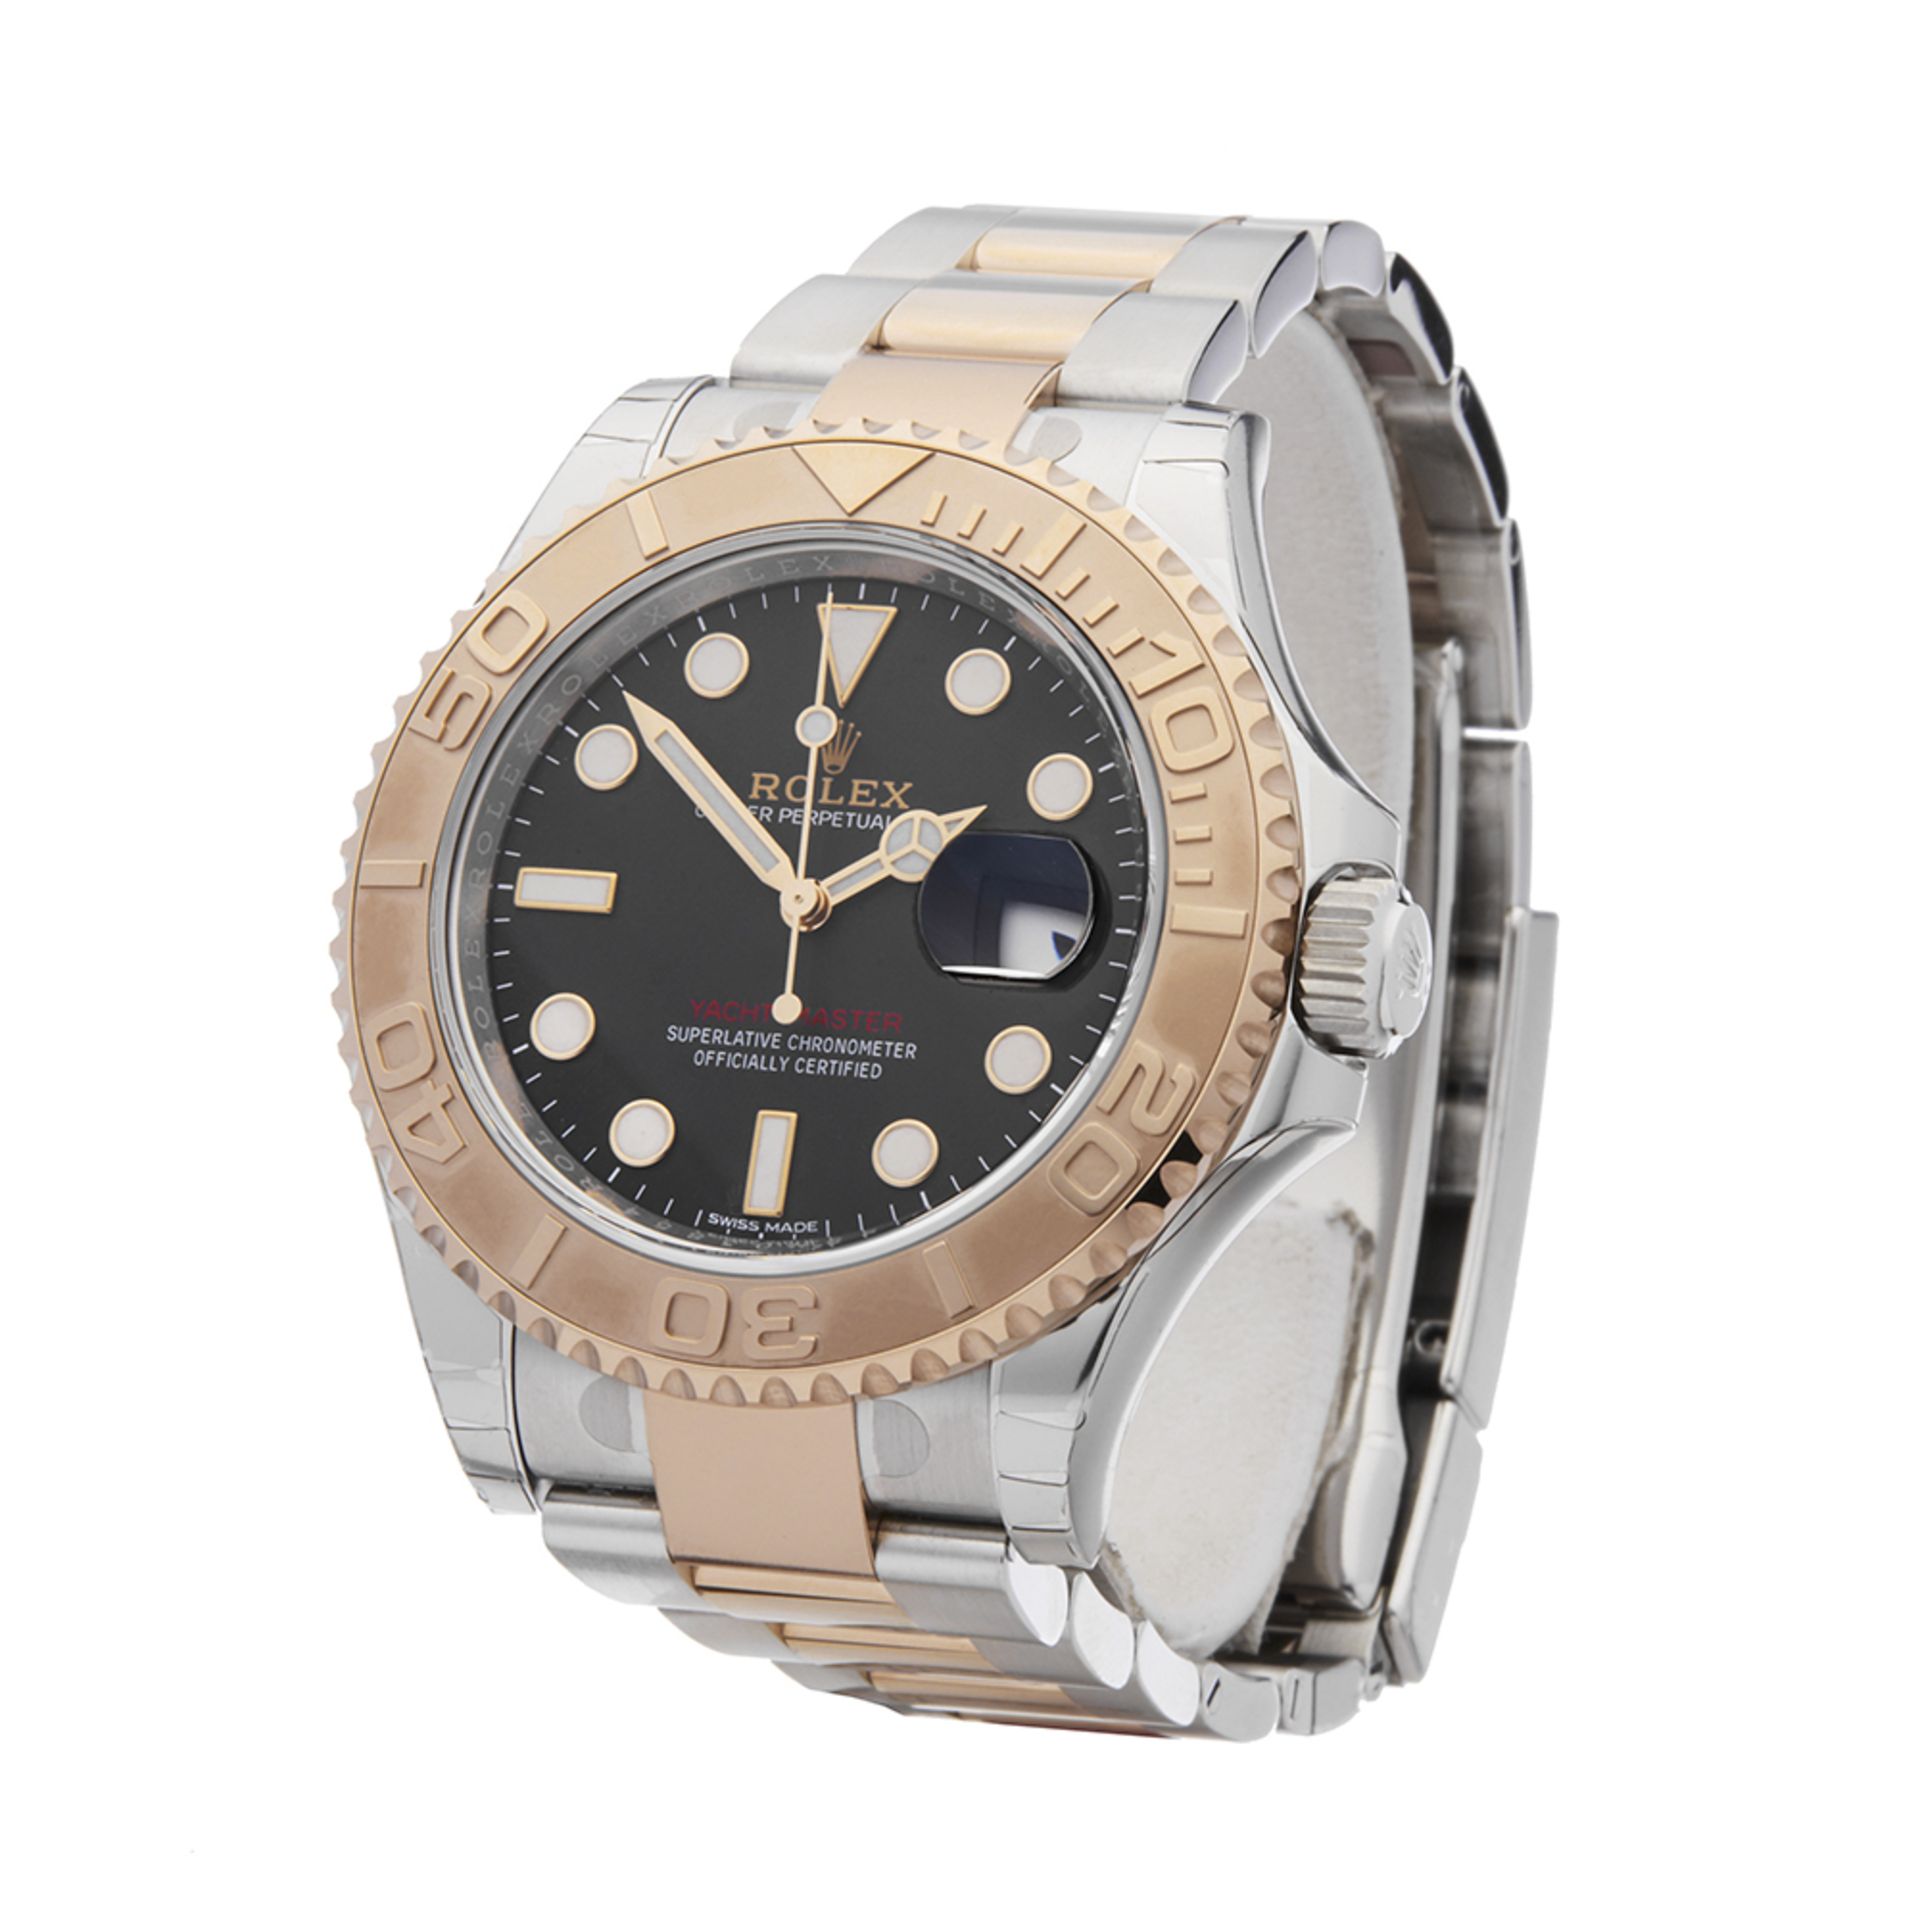 Rolex Yatch Master Stainless Steel & 18k Yellow Gold - 116621 - Image 3 of 7